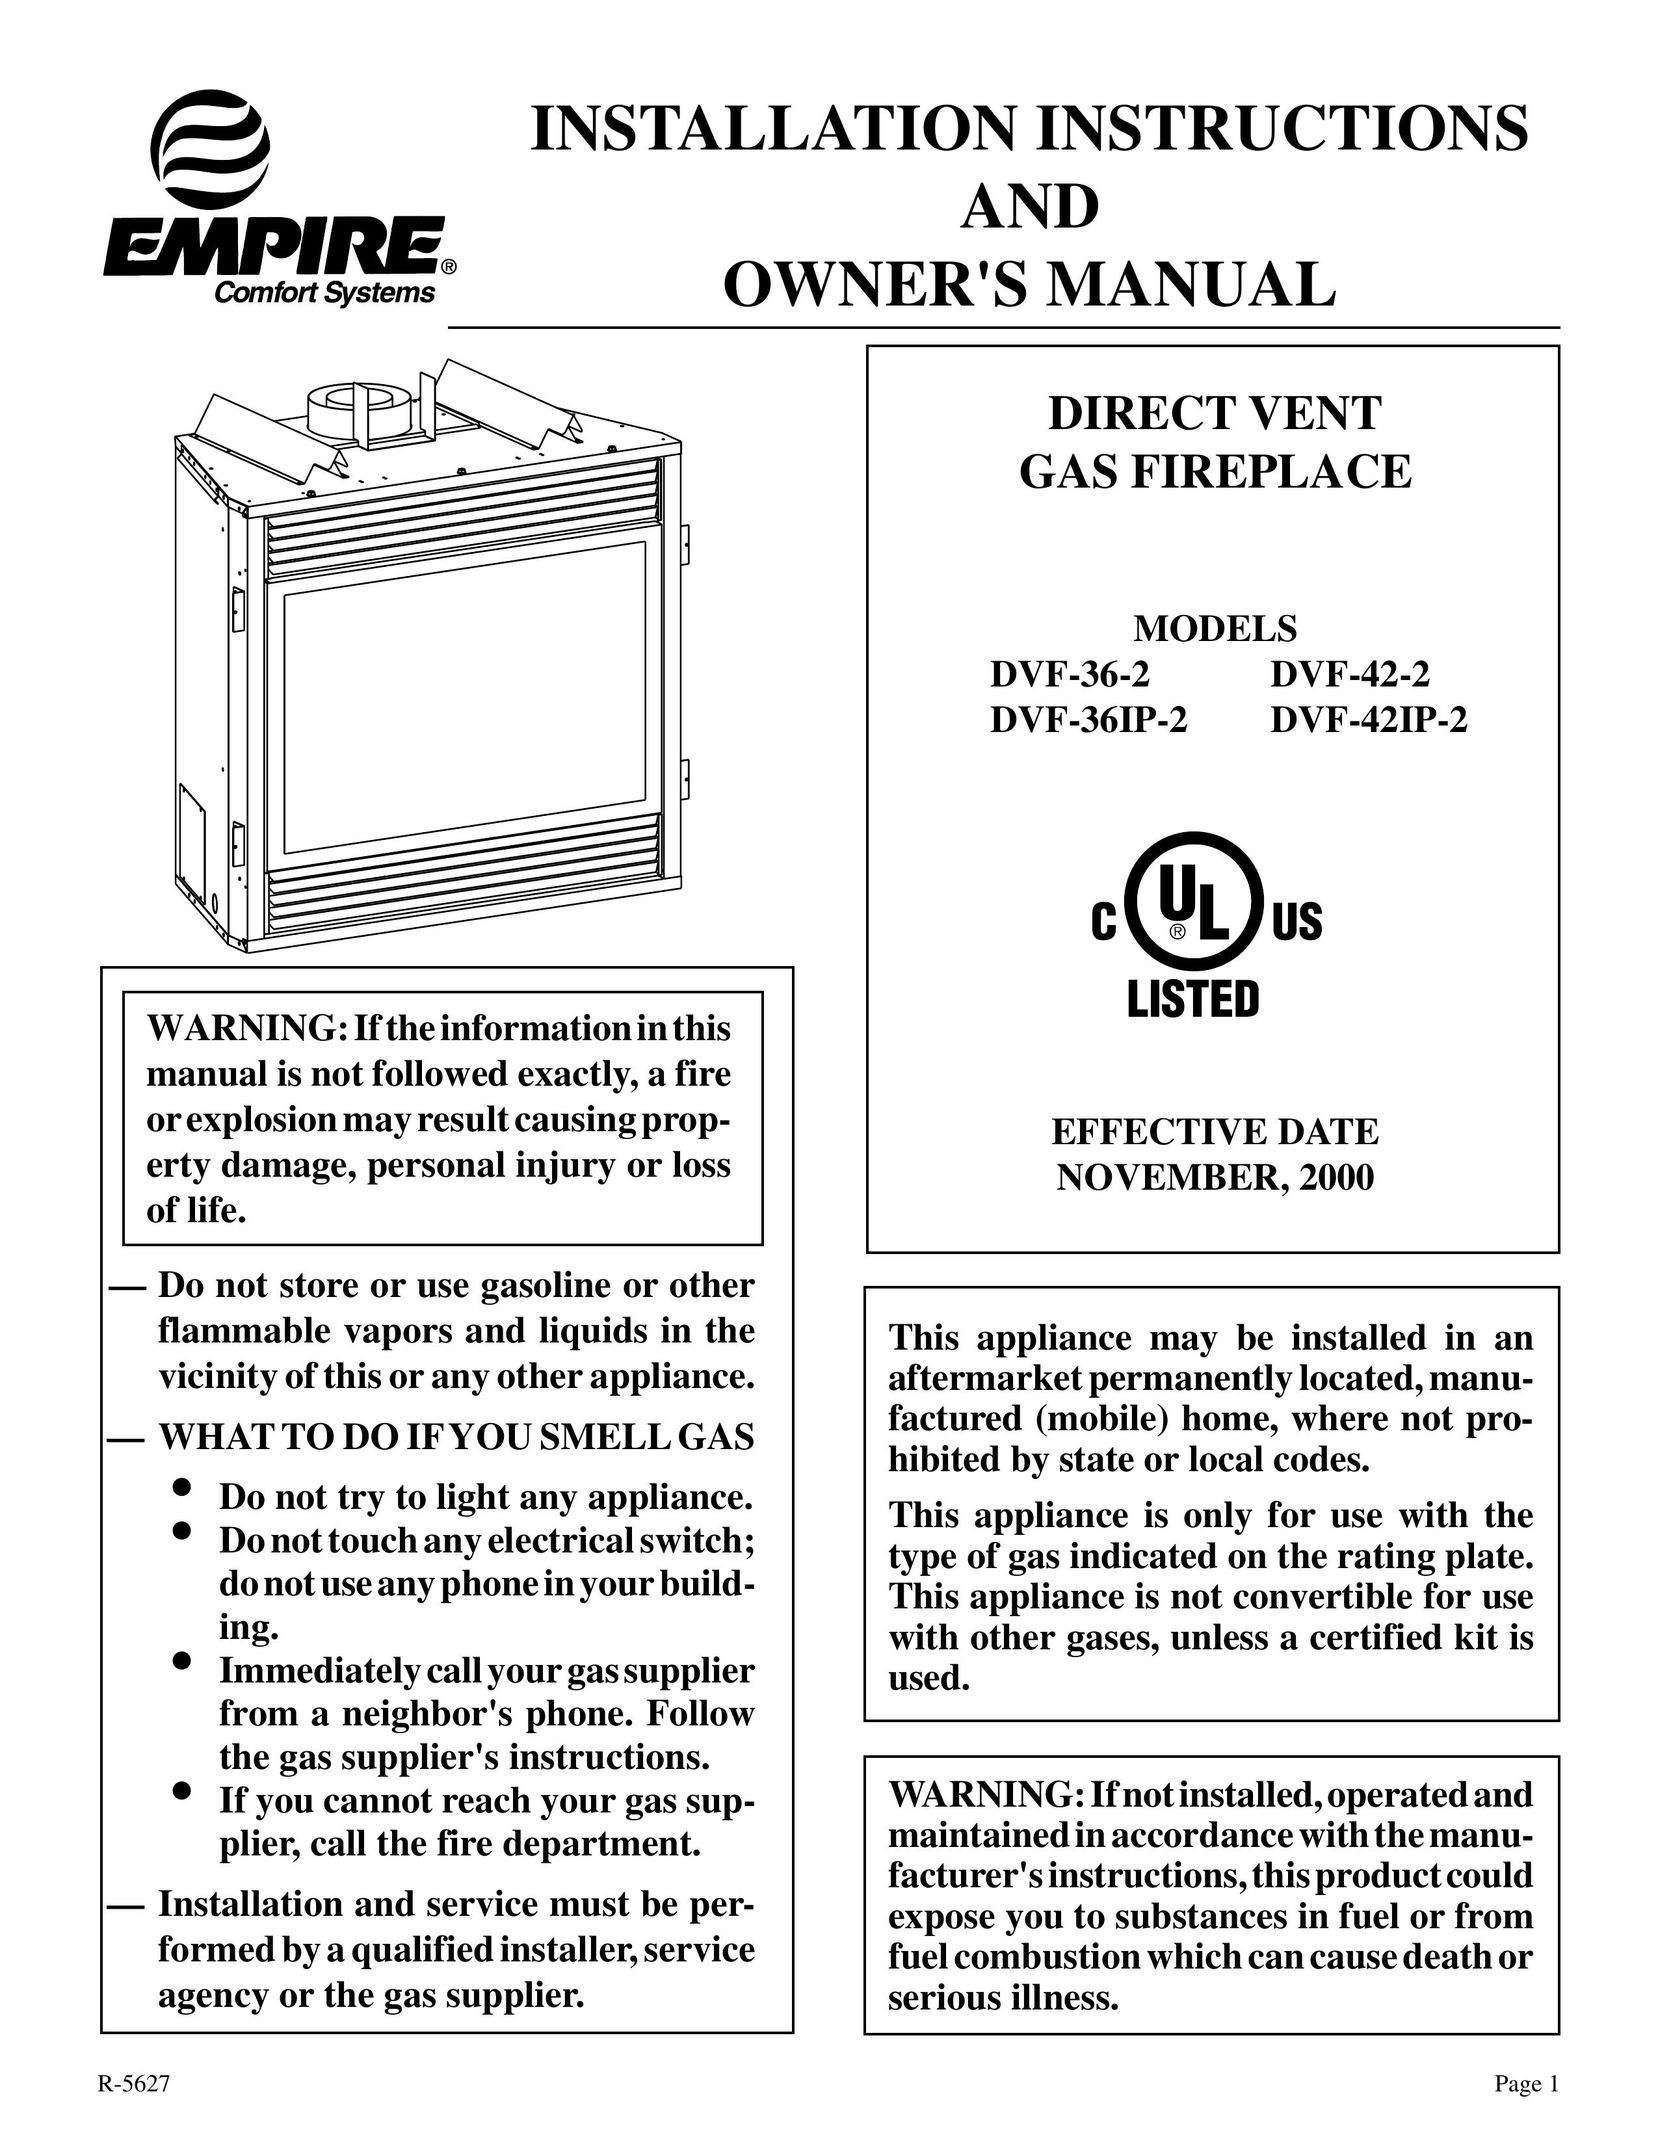 Empire Comfort Systems DVF-42IP-2 Indoor Fireplace User Manual